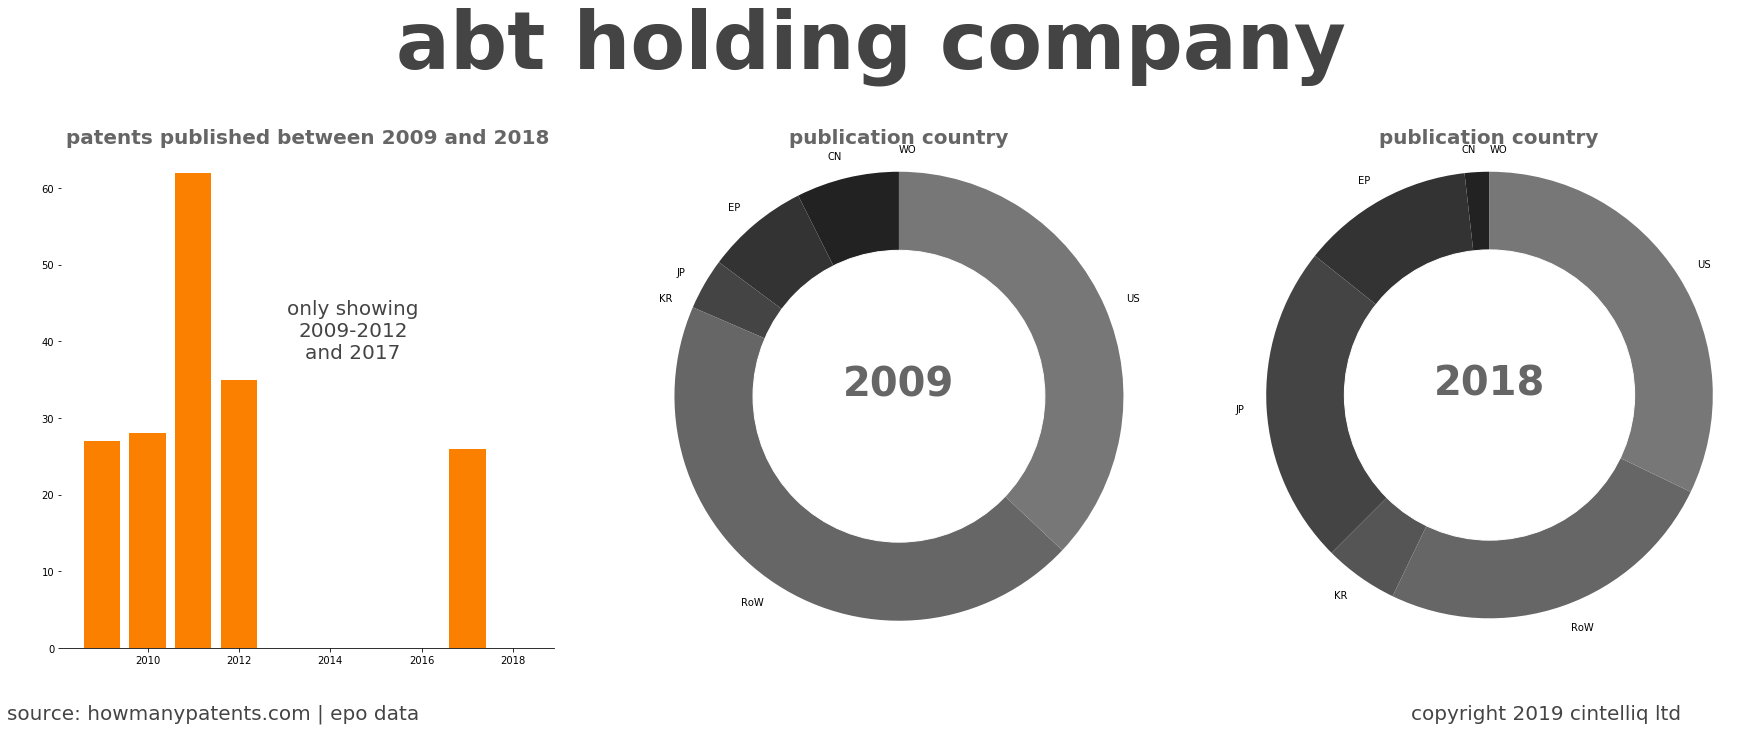 summary of patents for Abt Holding Company